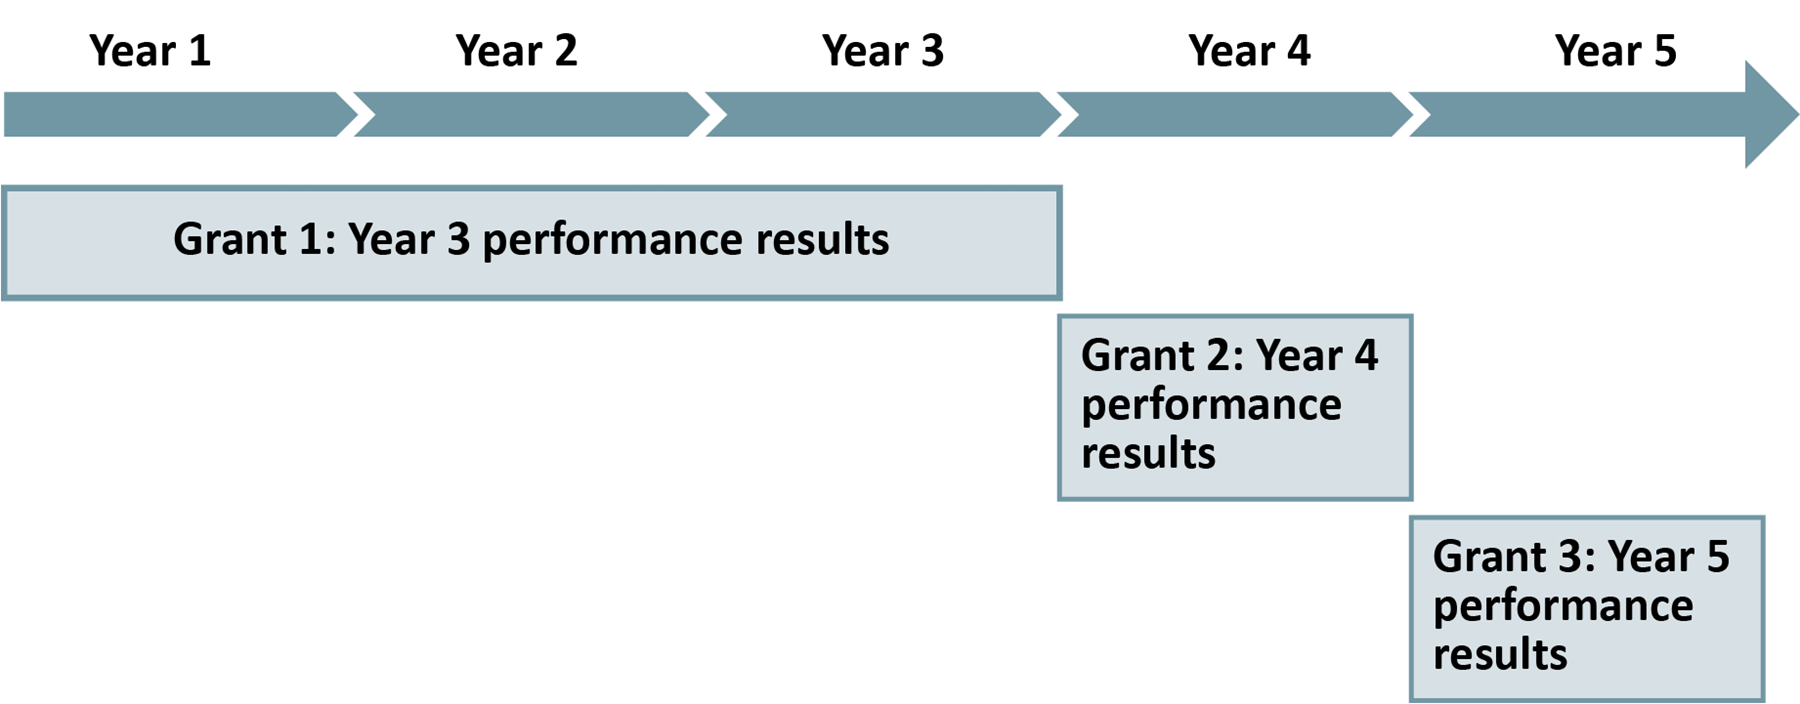 Annual and recurring PSU grants for incenting and rewarding defined and measured longer-term enterprise-wide performance-based target or milestone results.